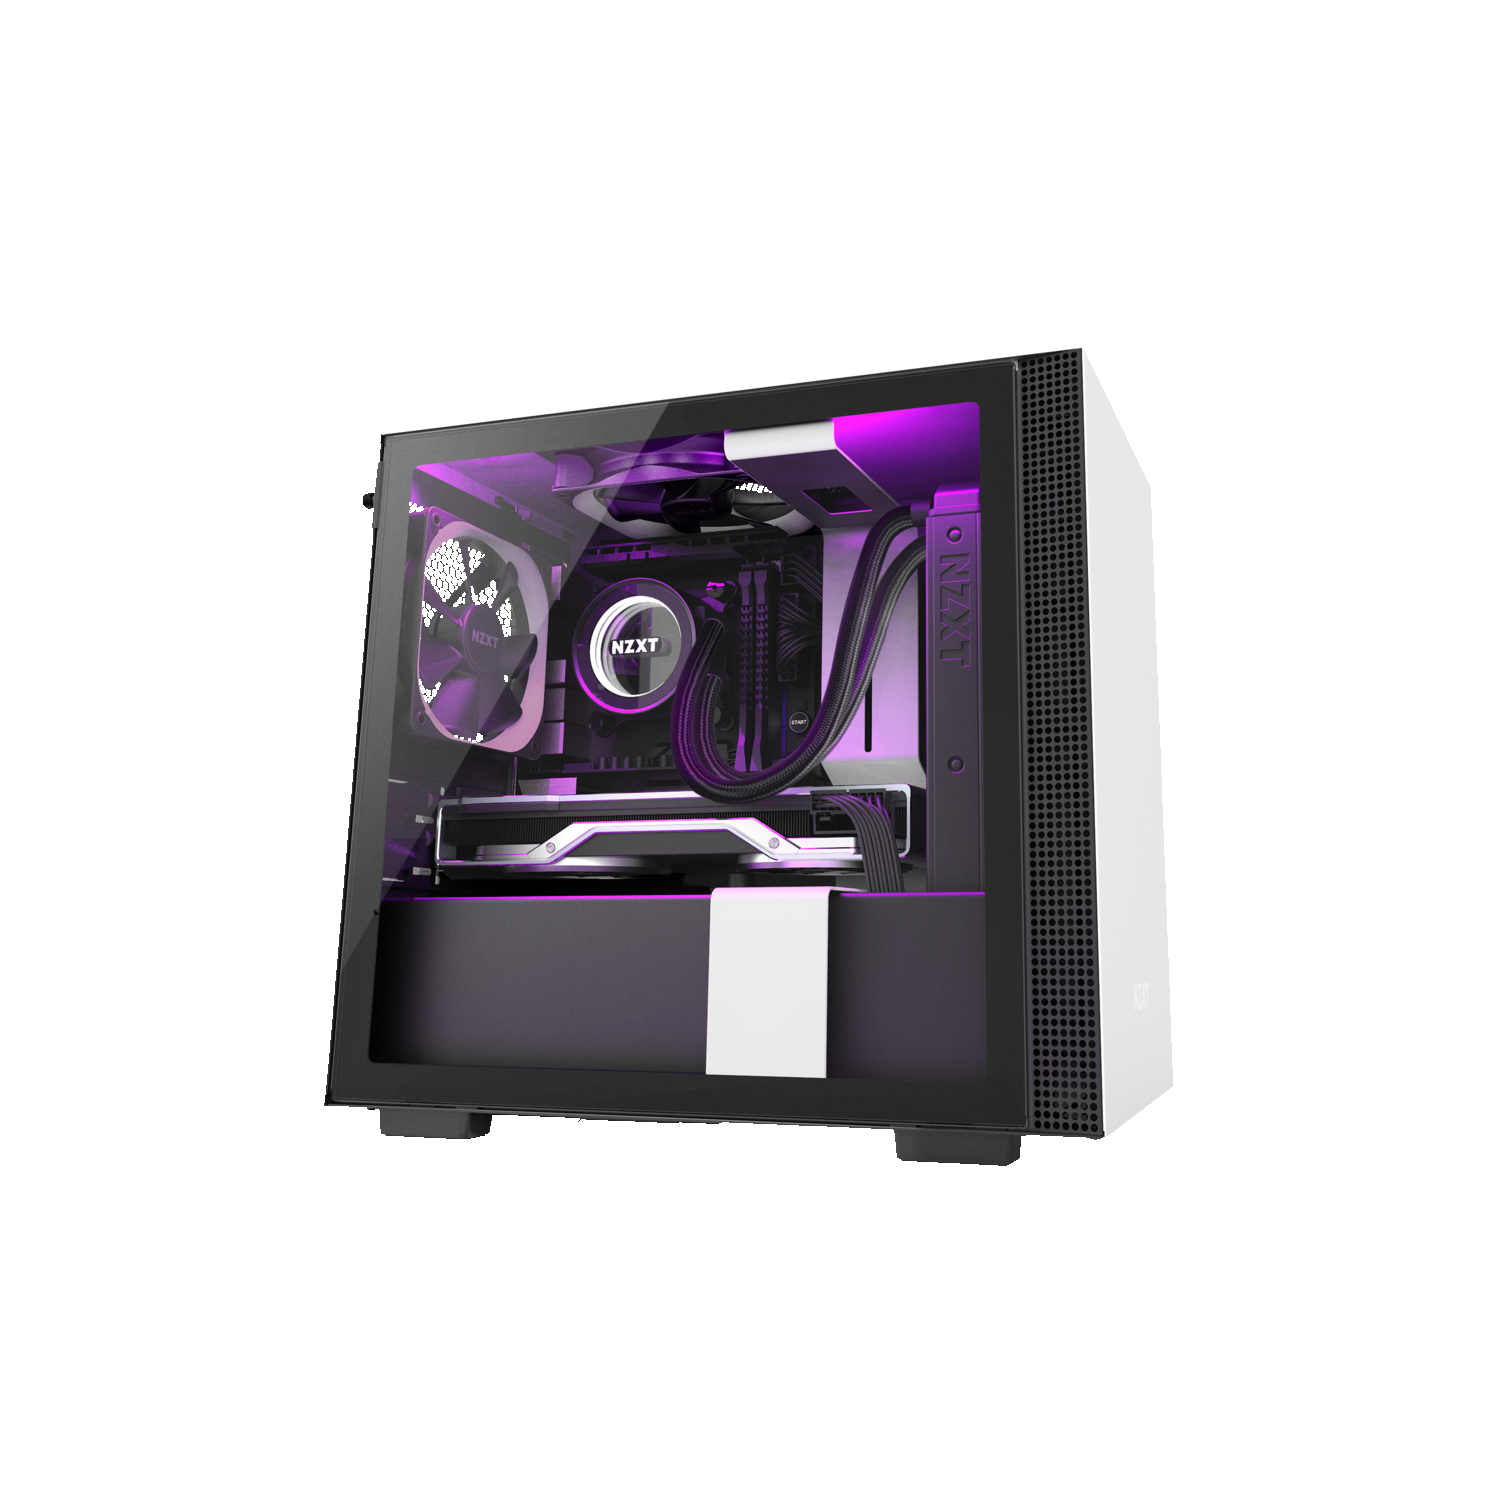 NZXT H210i - Mini-ITX PC Gaming Case - Front I/O USB Type-C Port - Tempered Glass Side Panel - Black/White (CA-H210I-W1)